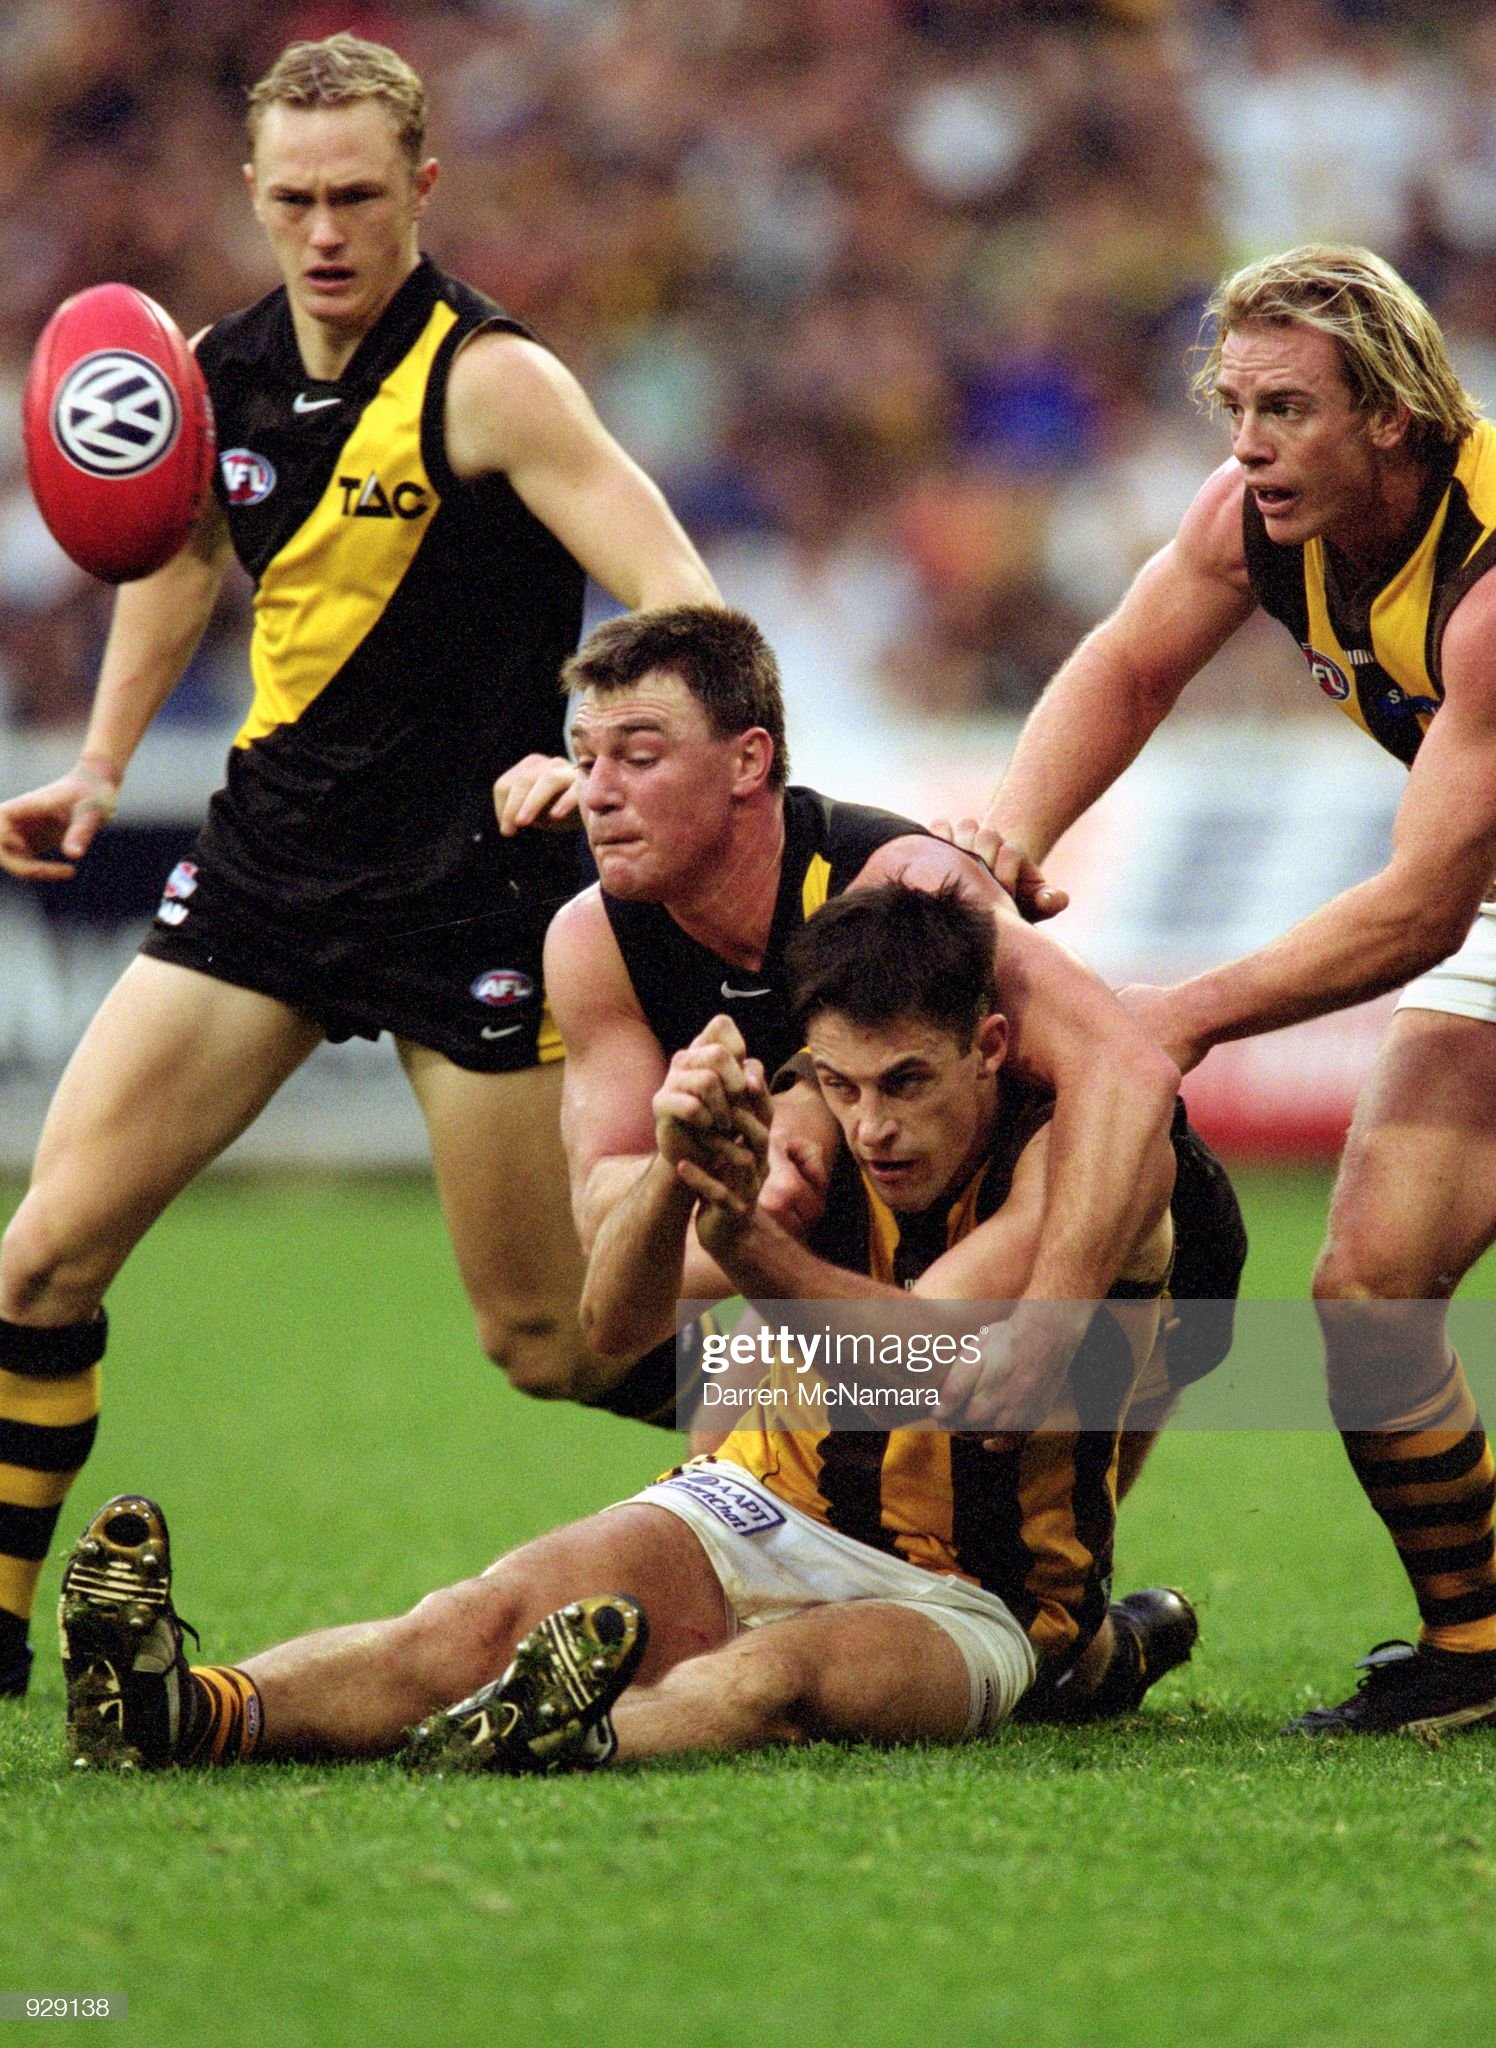 jul-2001-paul-broderick-for-richmond-tackles-jade-rawlings-for-14-picture-id929138